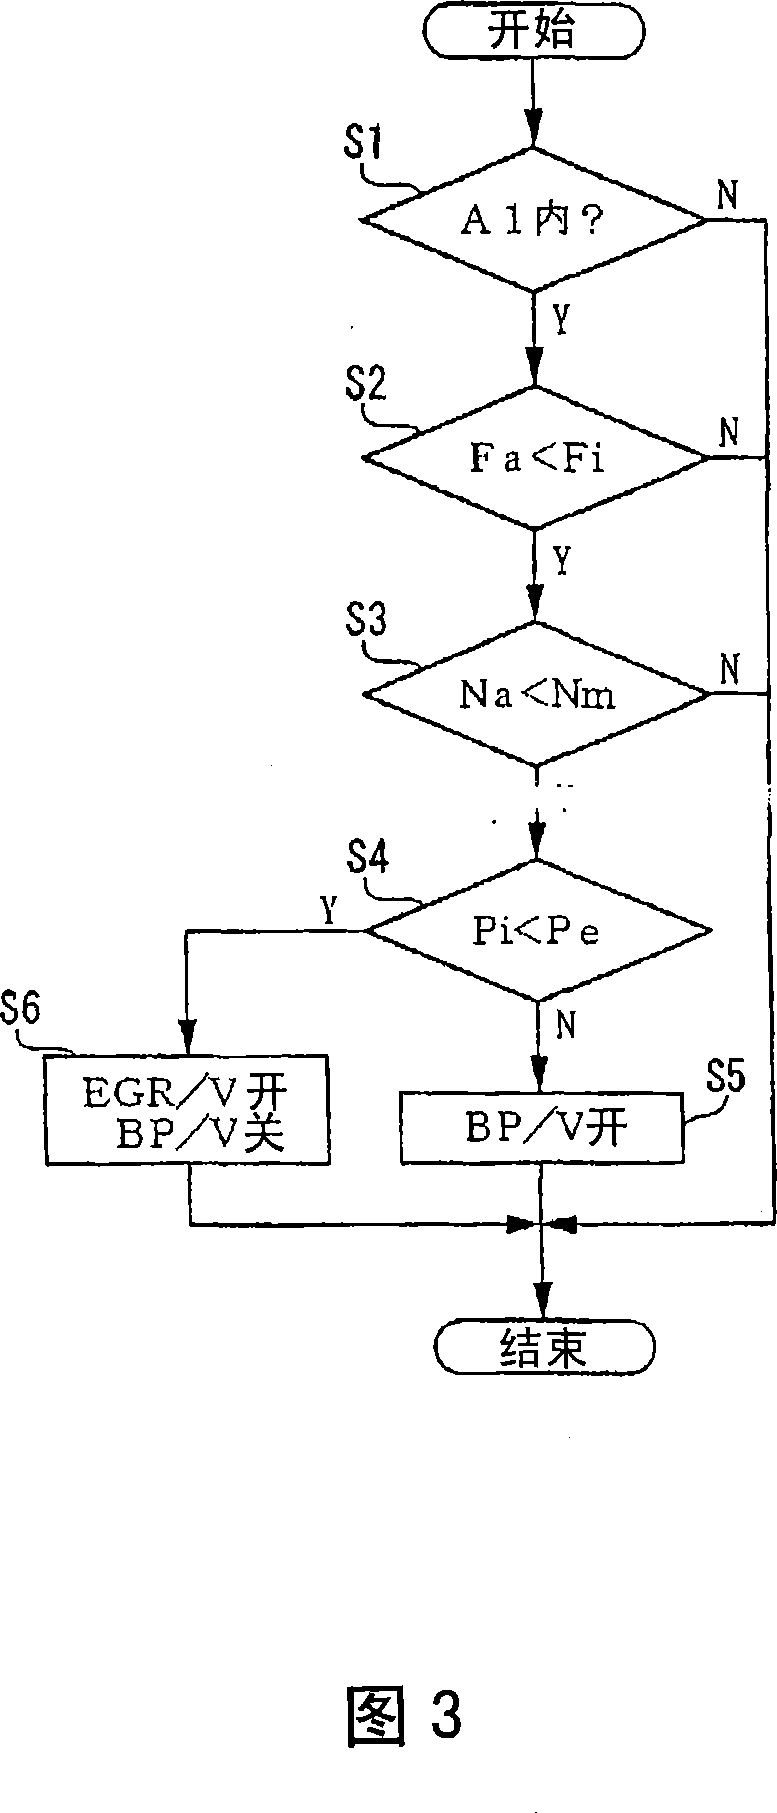 Intake controller of internal combustion engine